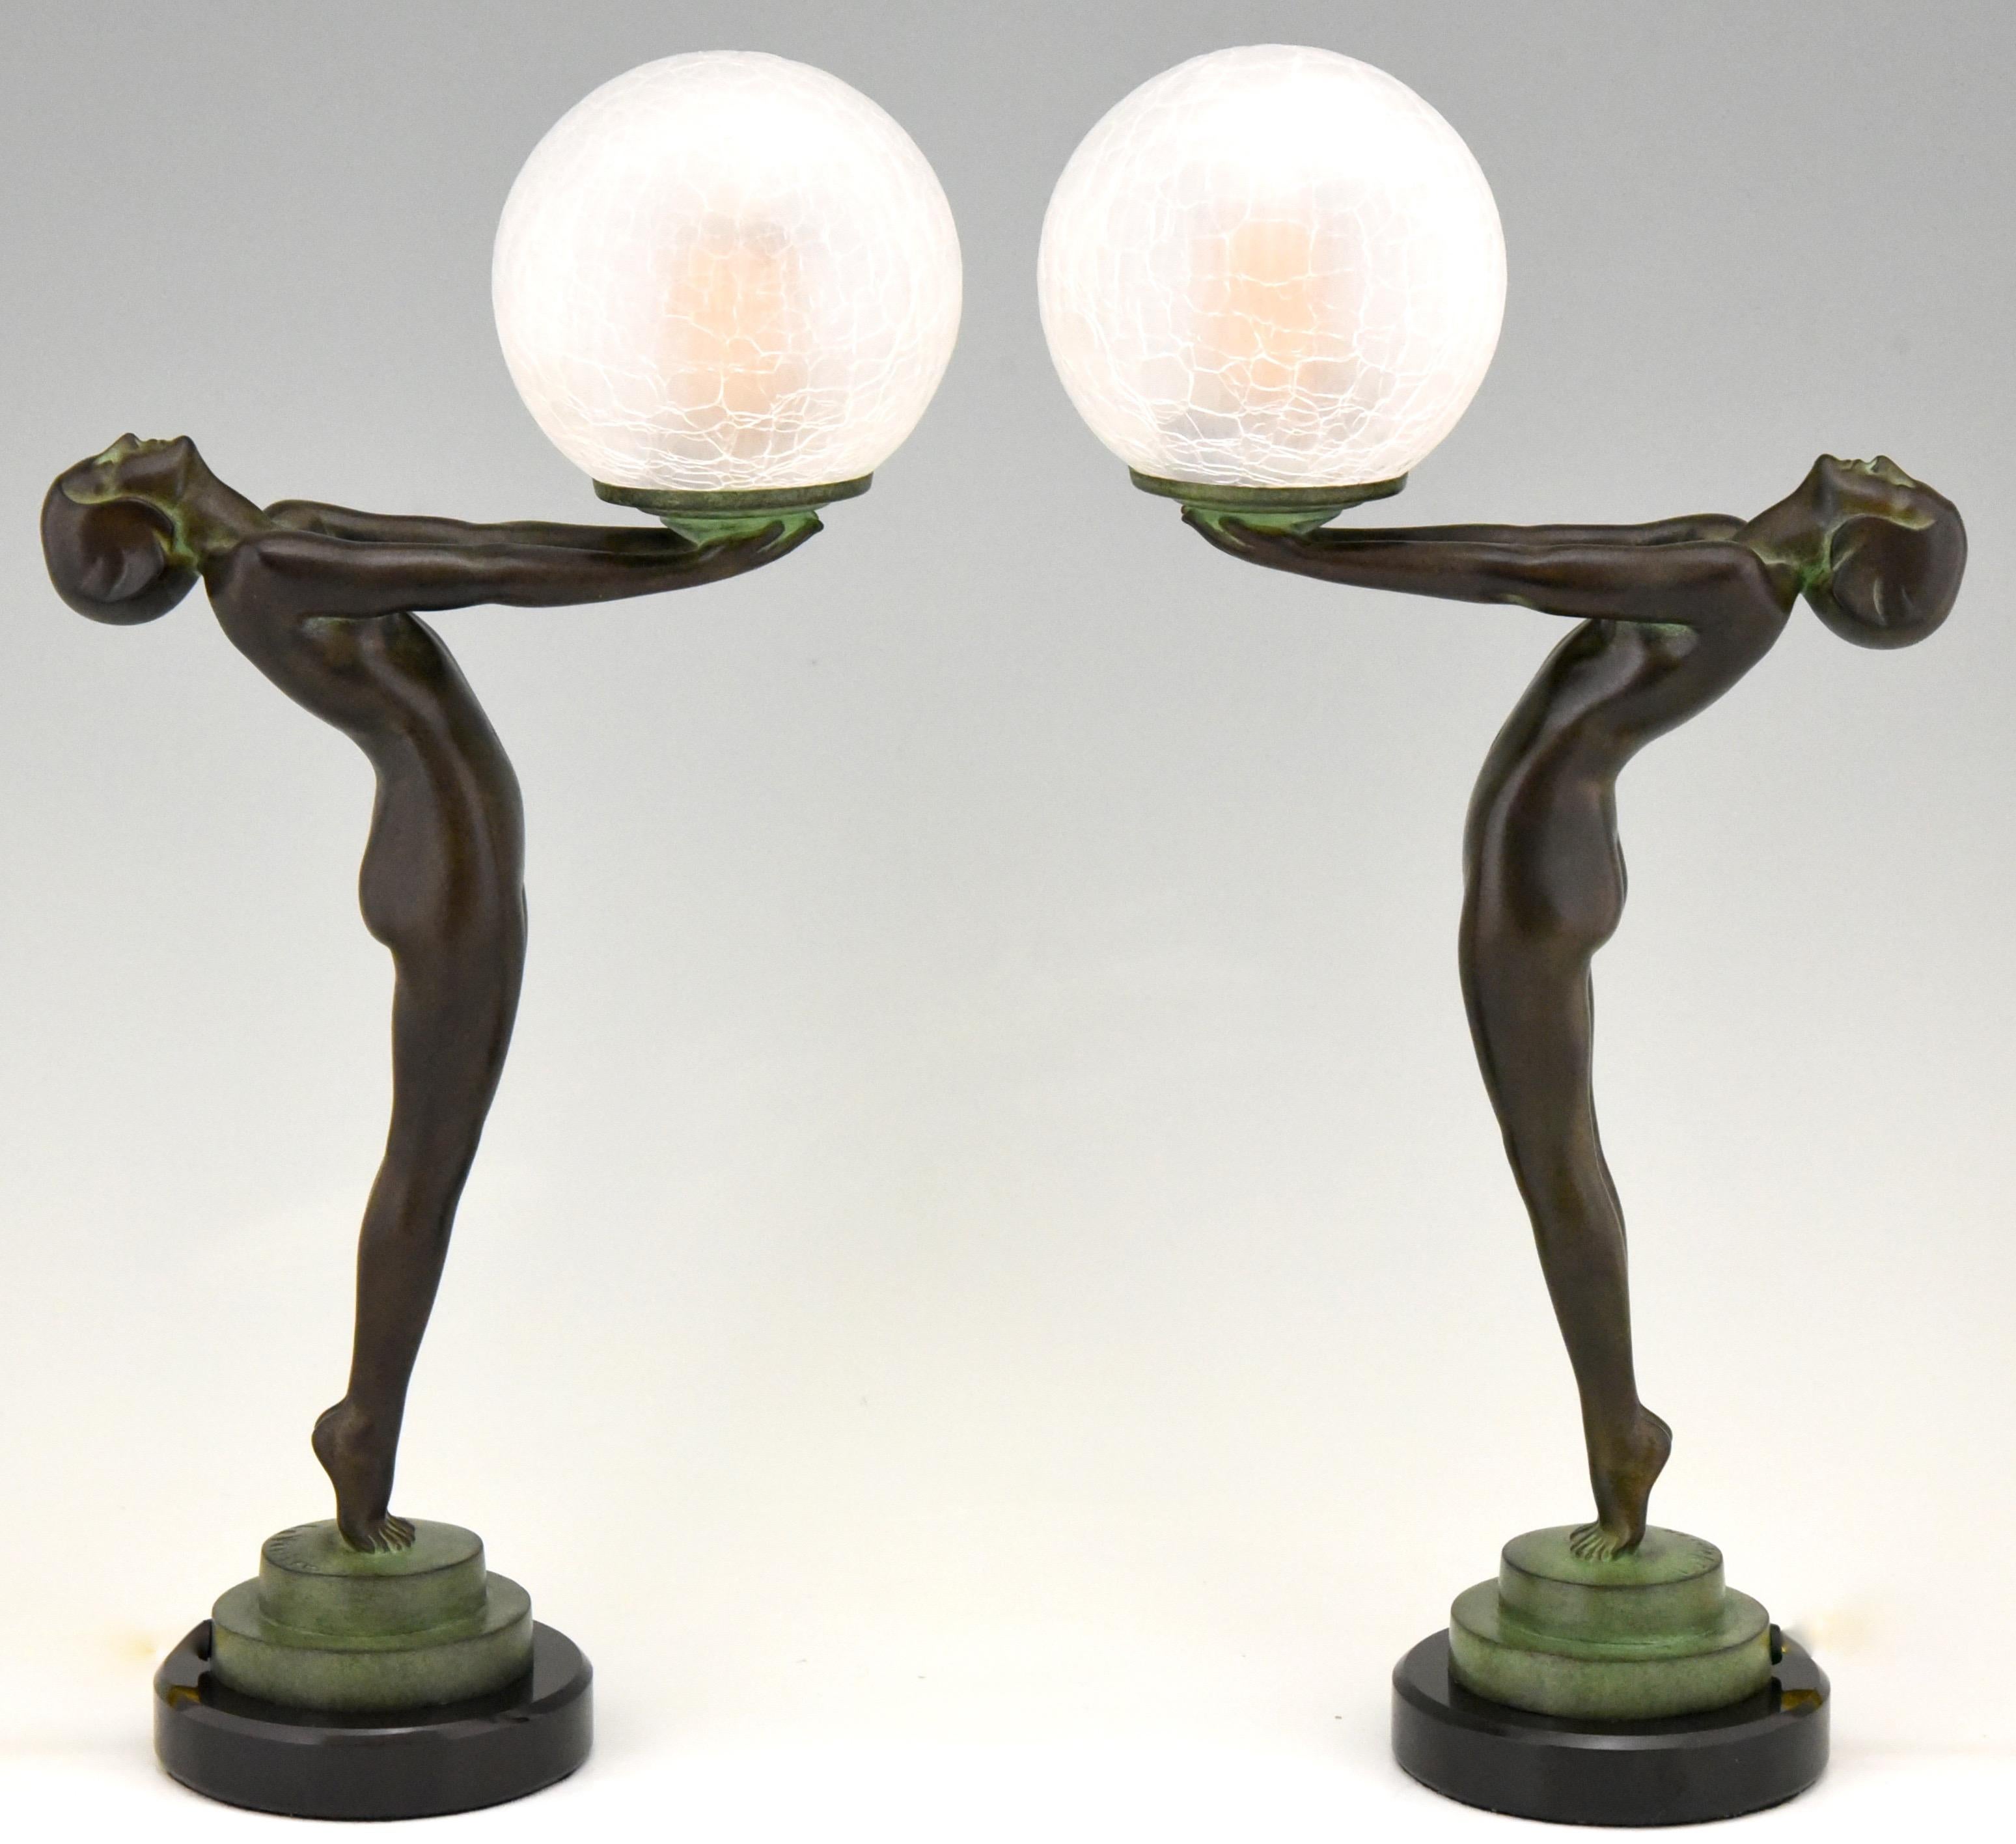 OFFER FOR JOHN: A pair of Art Deco style lamps by Max Le Verrier. 